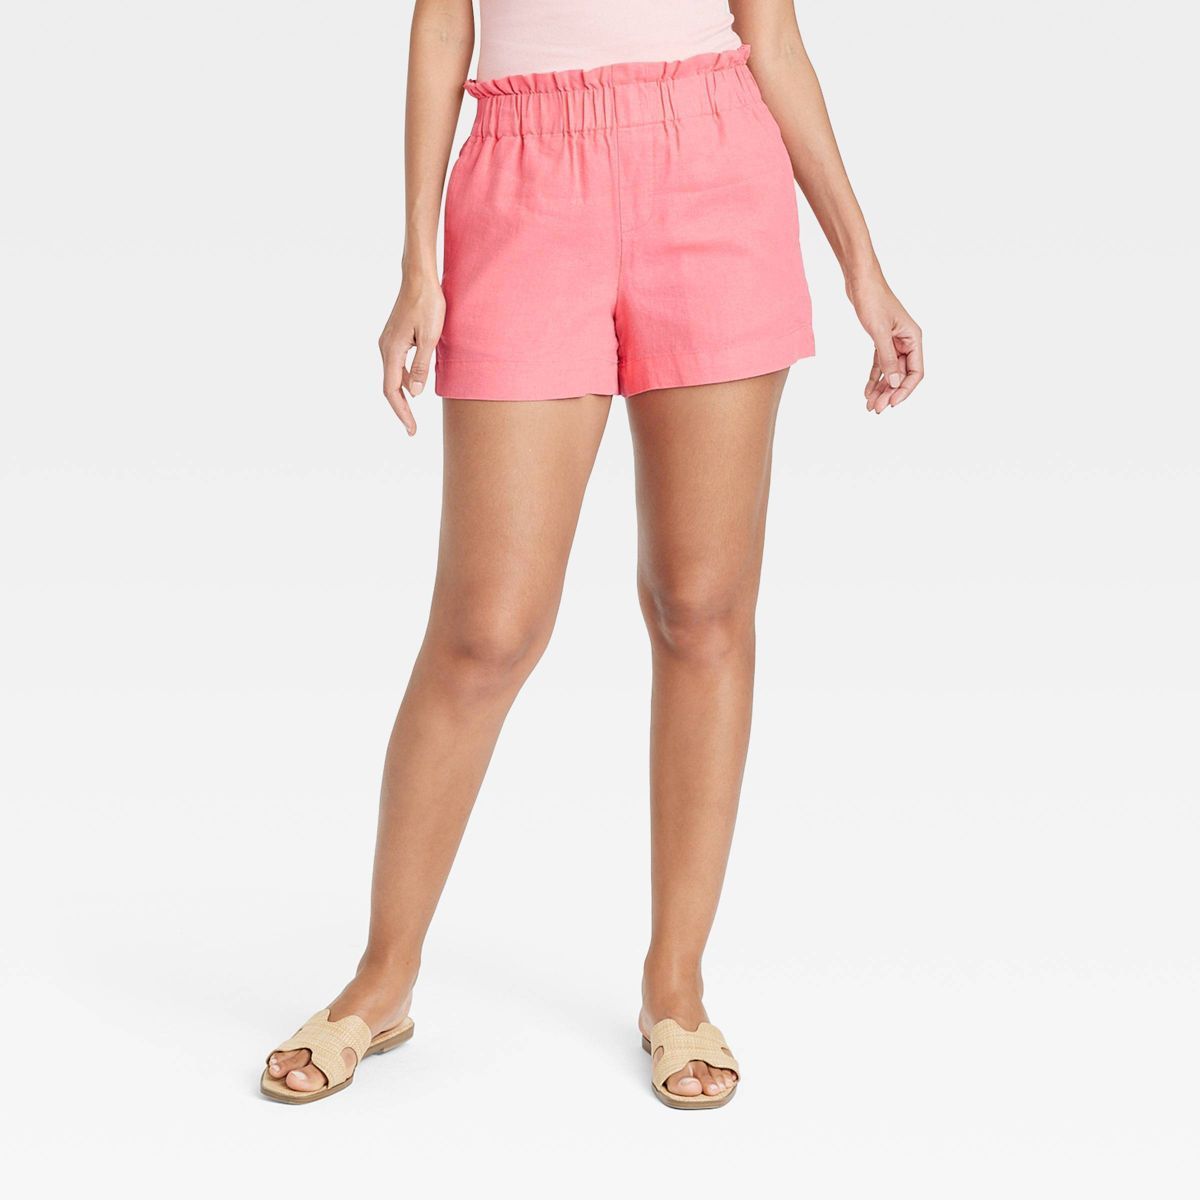 Women's High-Rise Linen Pull-On Shorts - A New Day™ Pink M | Target